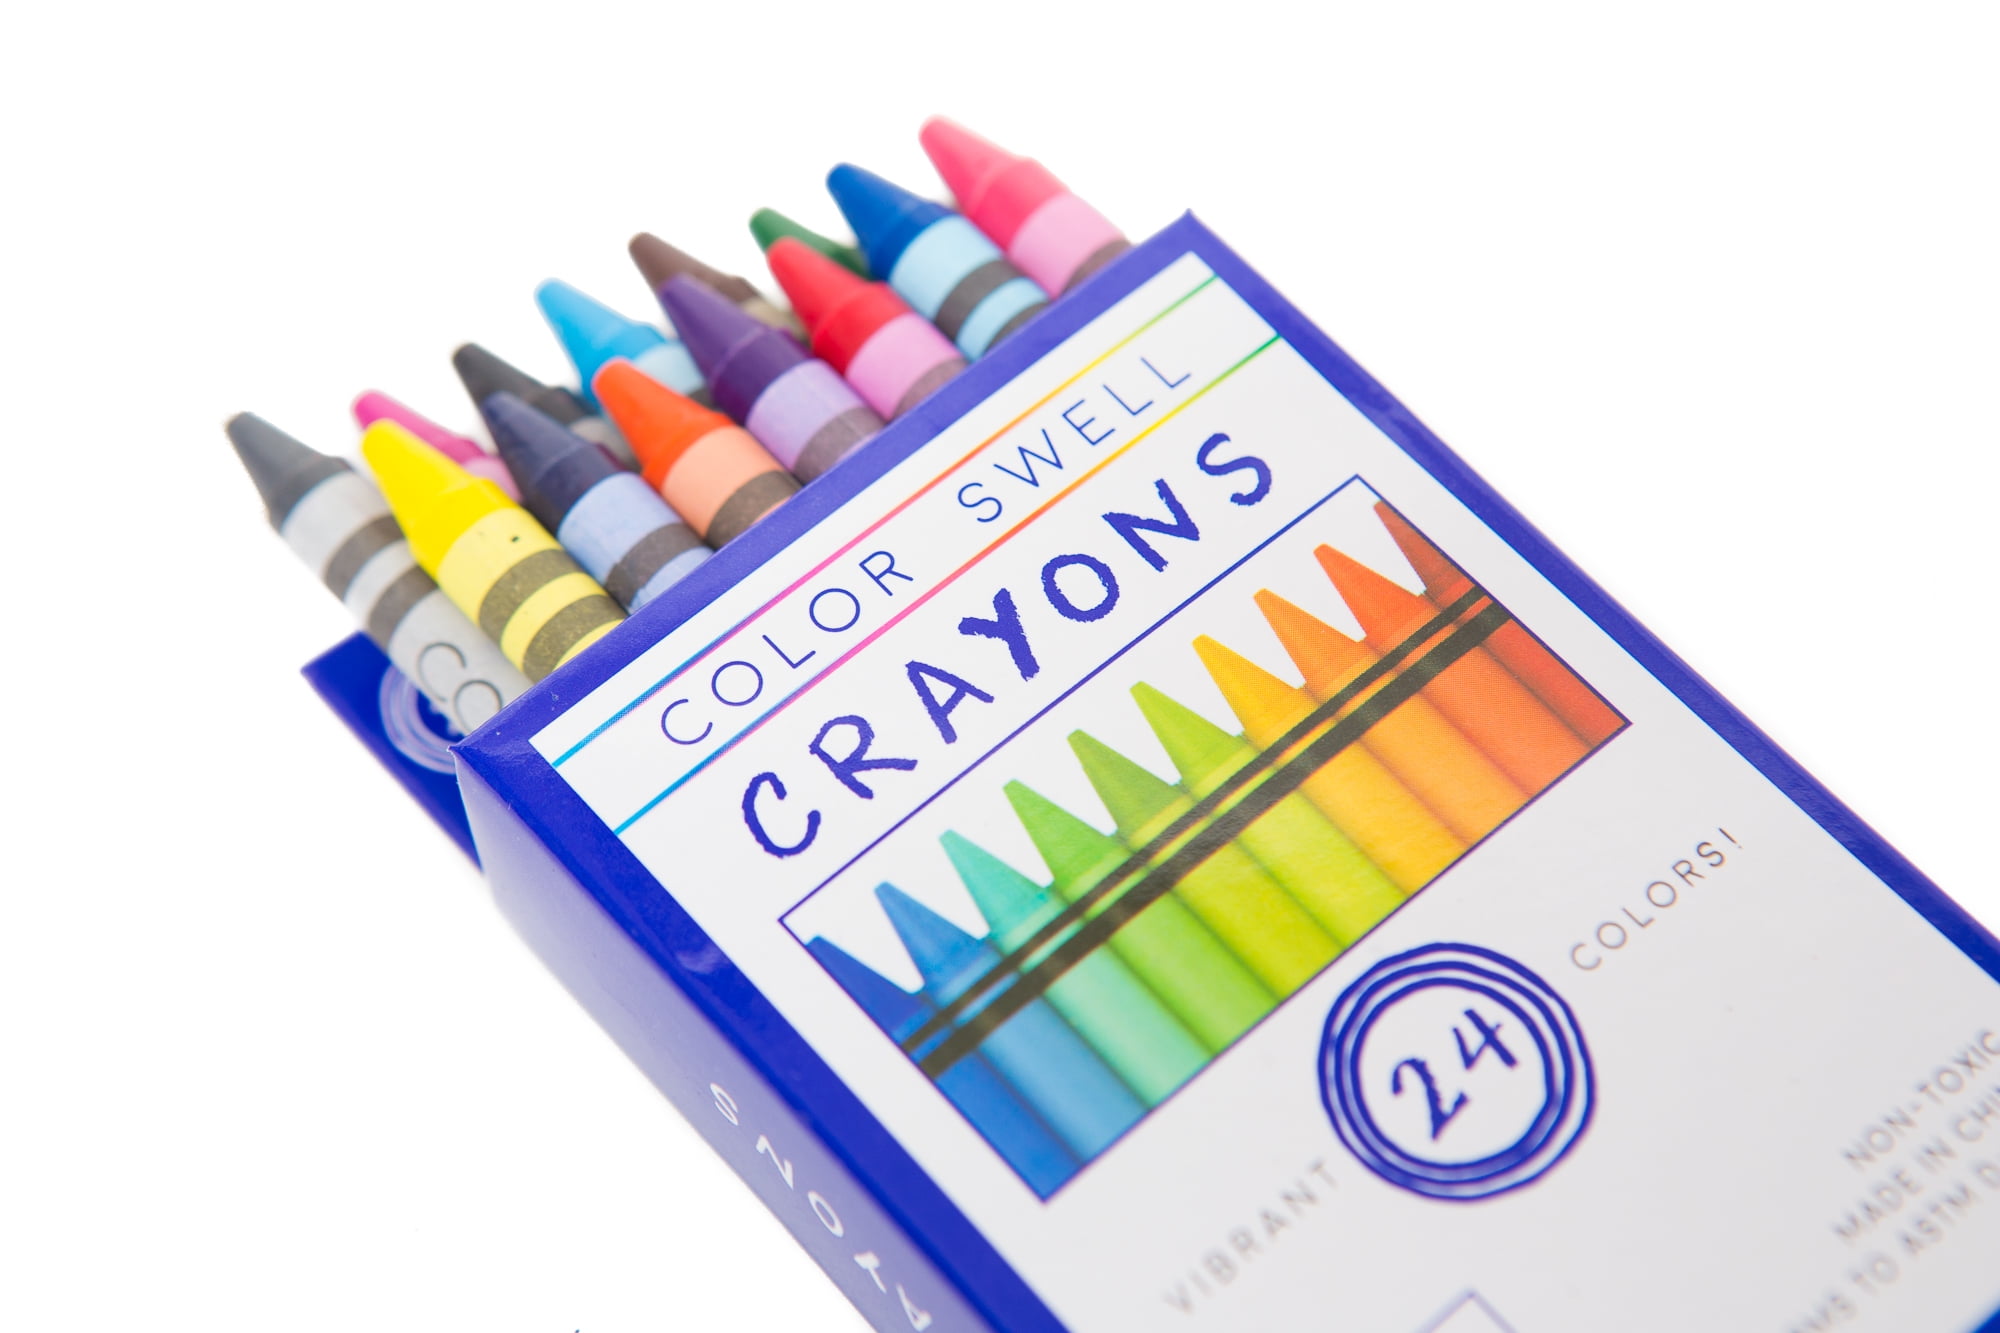 Color Swell Regular and Neon Crayon Bulk Packs - 4 Boxes of Fun Neon Crayons and 4 Boxes of Colorful Regular Crayons of Teacher Quality Durable